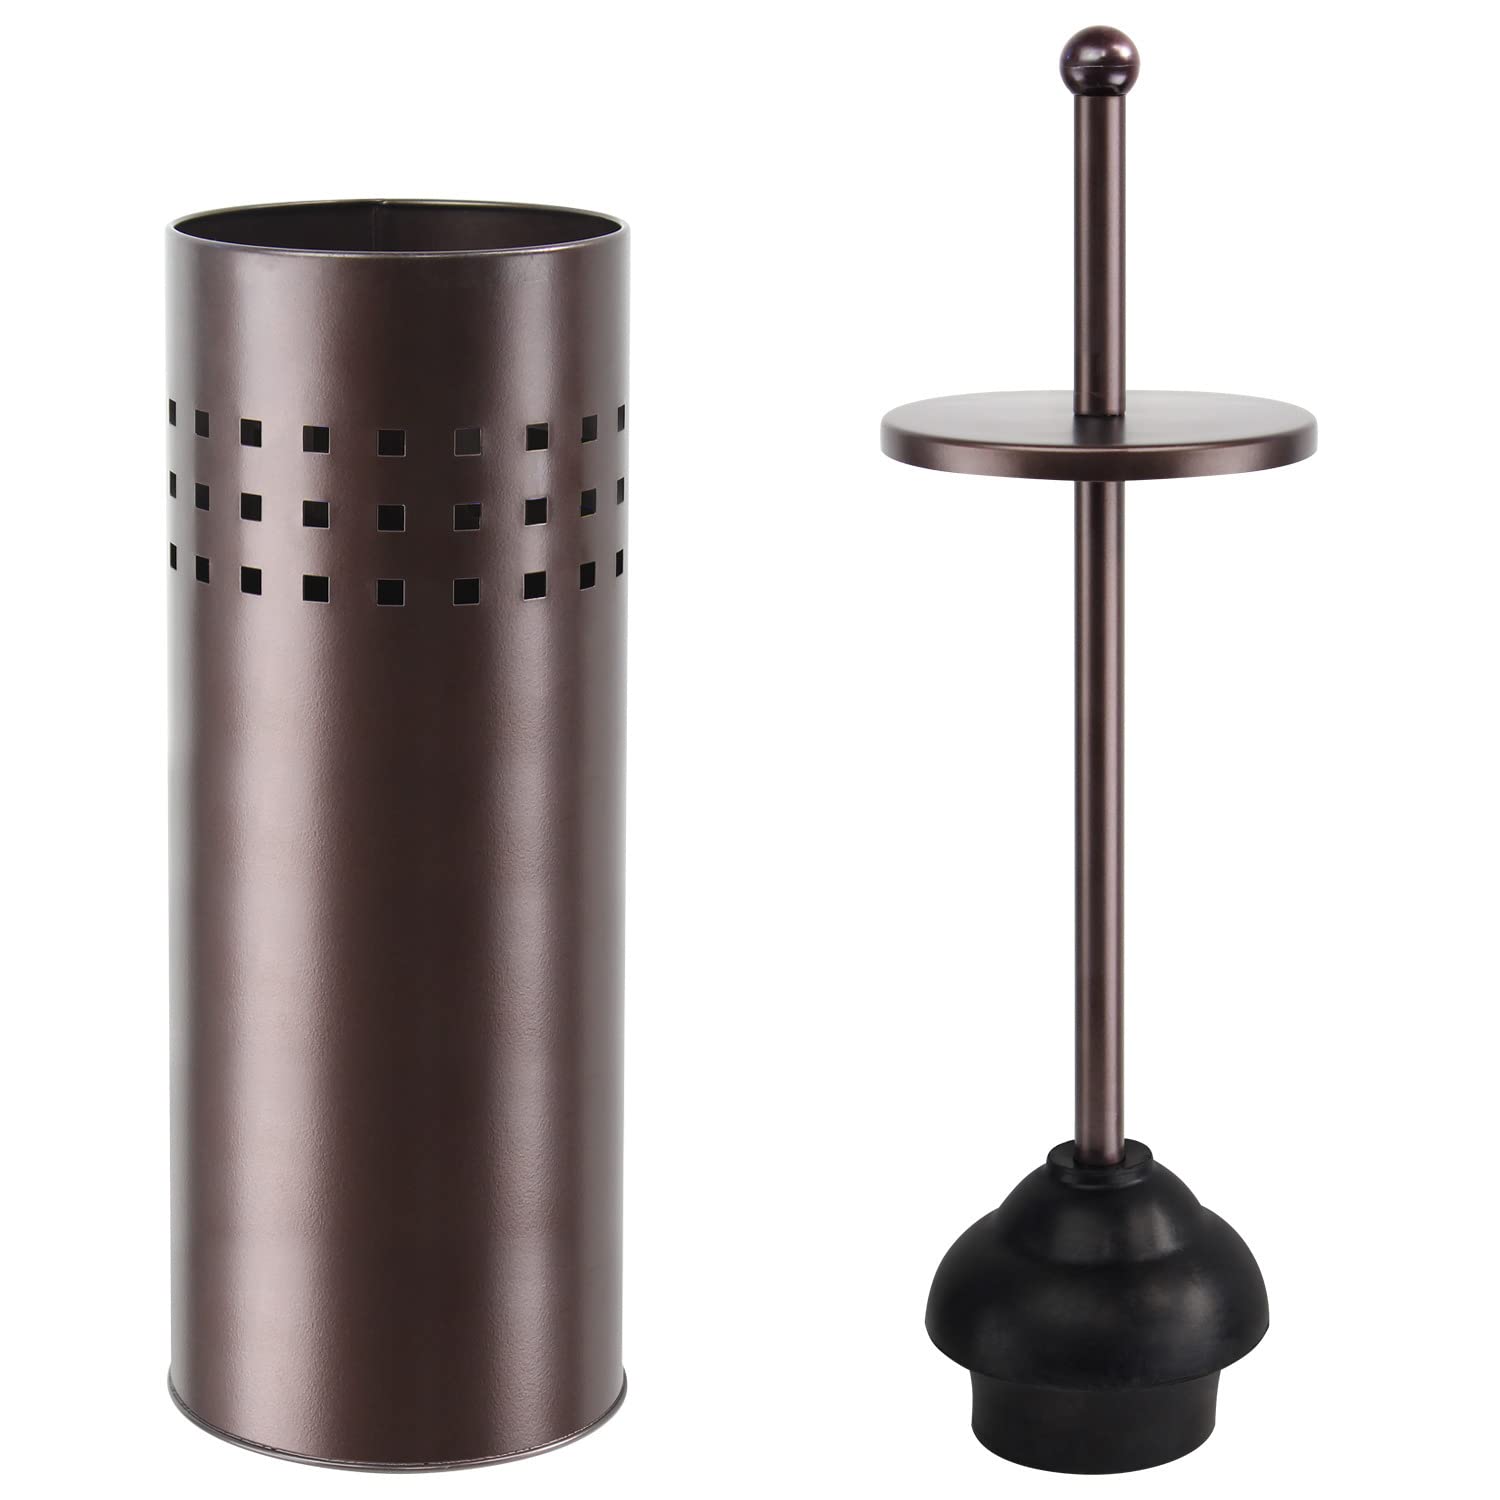 Book Cover Toilet Plunger with Holder for Bathroom, Multi Drain Suitable Also for Bathtubs, Quick Dry, Bronze